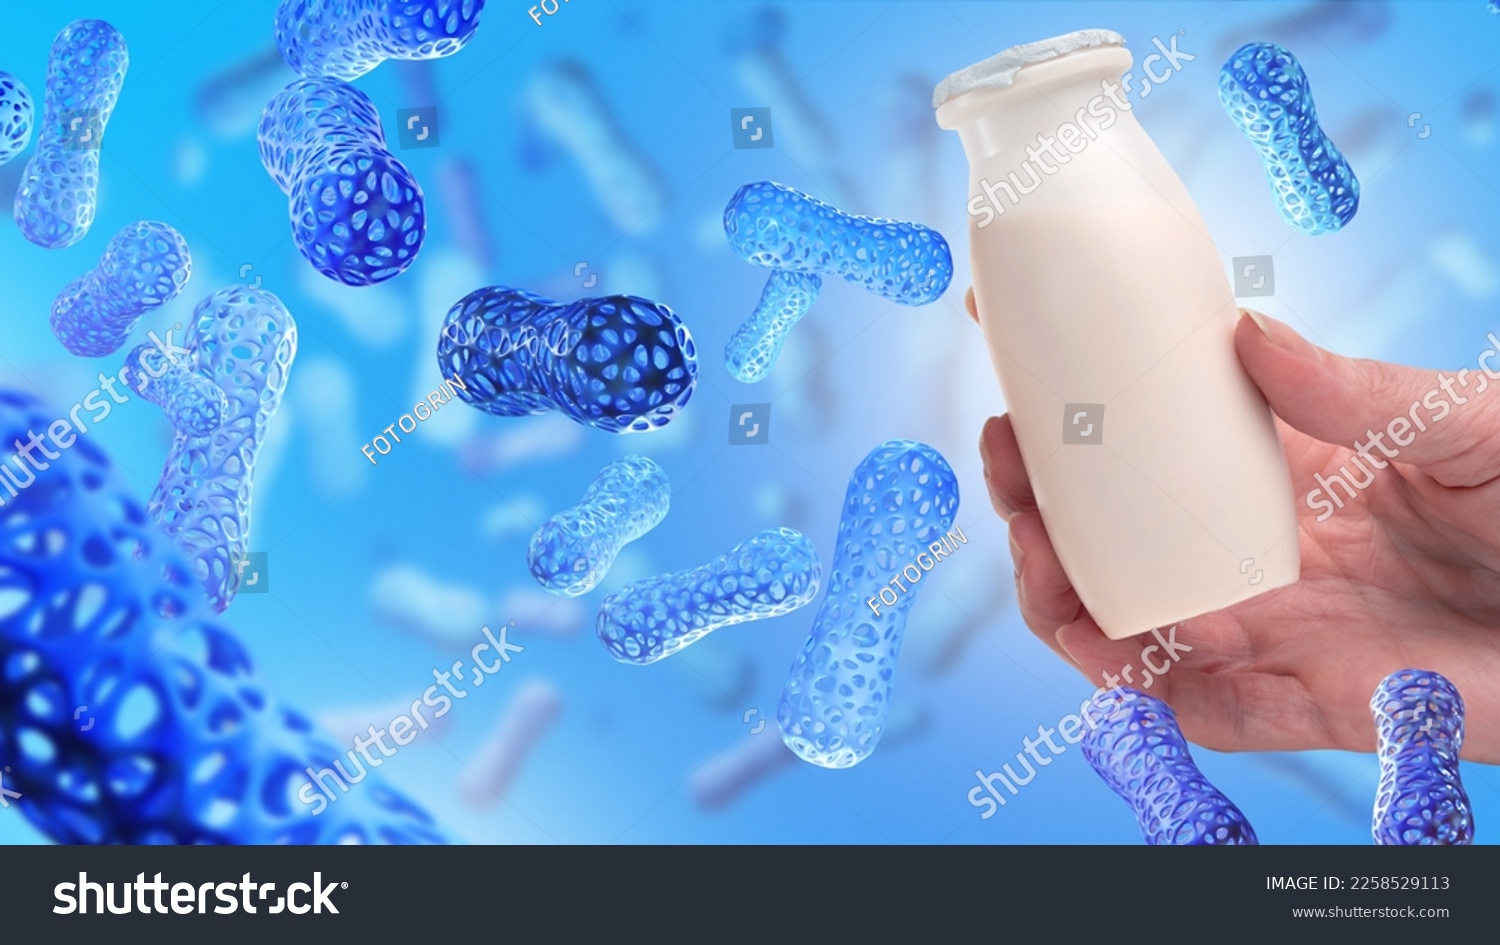 Substance microbiome. White medicine bottle in hand. Healthy nutrition to improve microbiome. Organism microbiome for immunity. Bottle with probiotic preparation. Biologically active drugs for health #2258529113